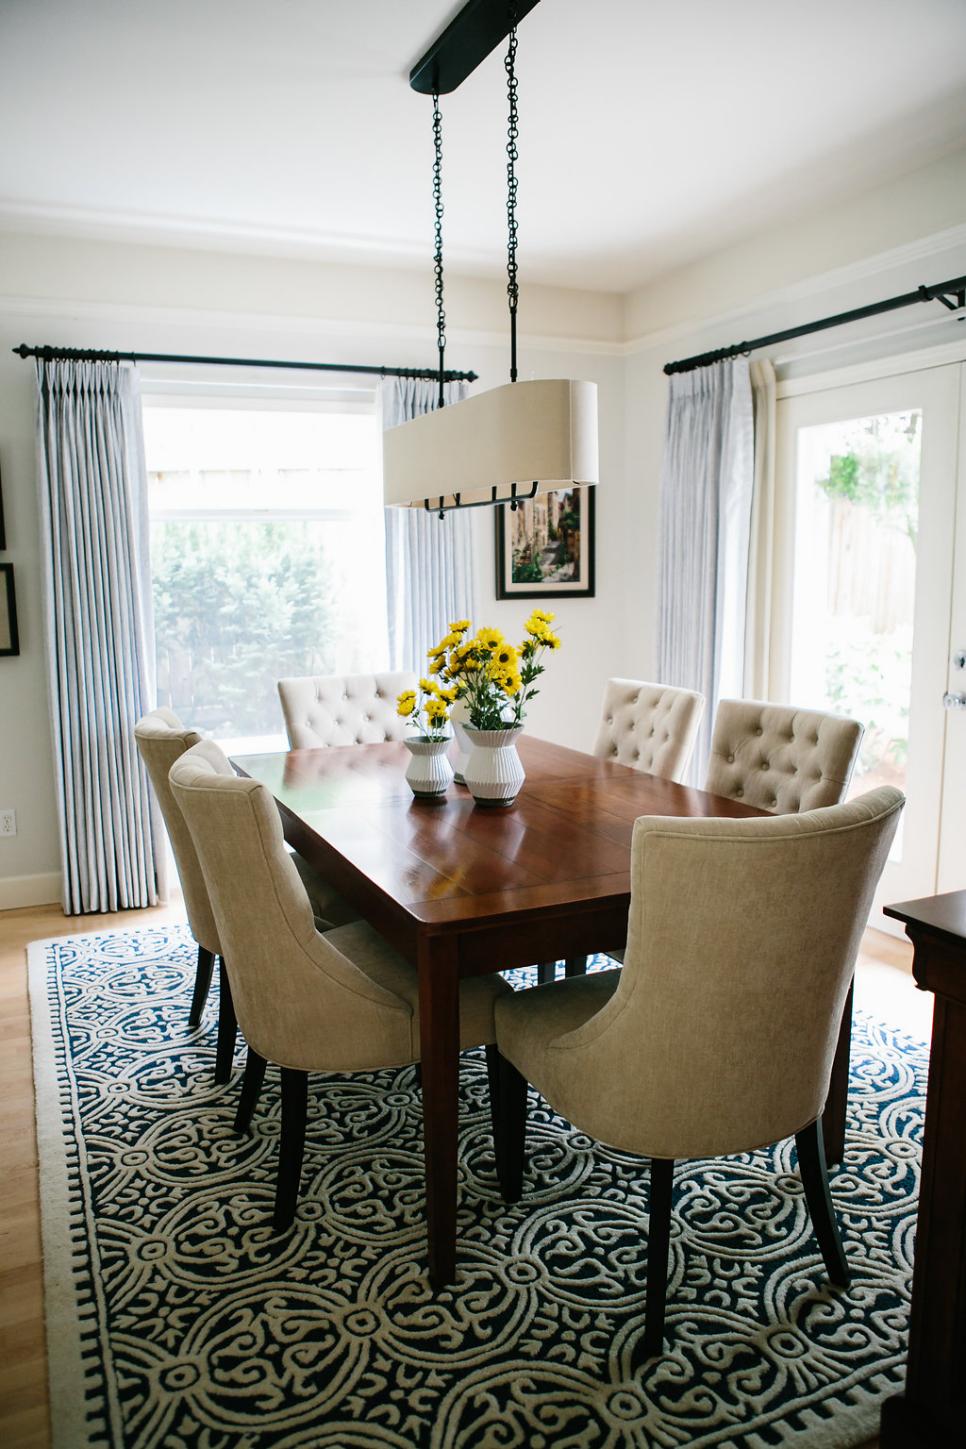 Transitional Dining Room With Blue Rug | HGTV